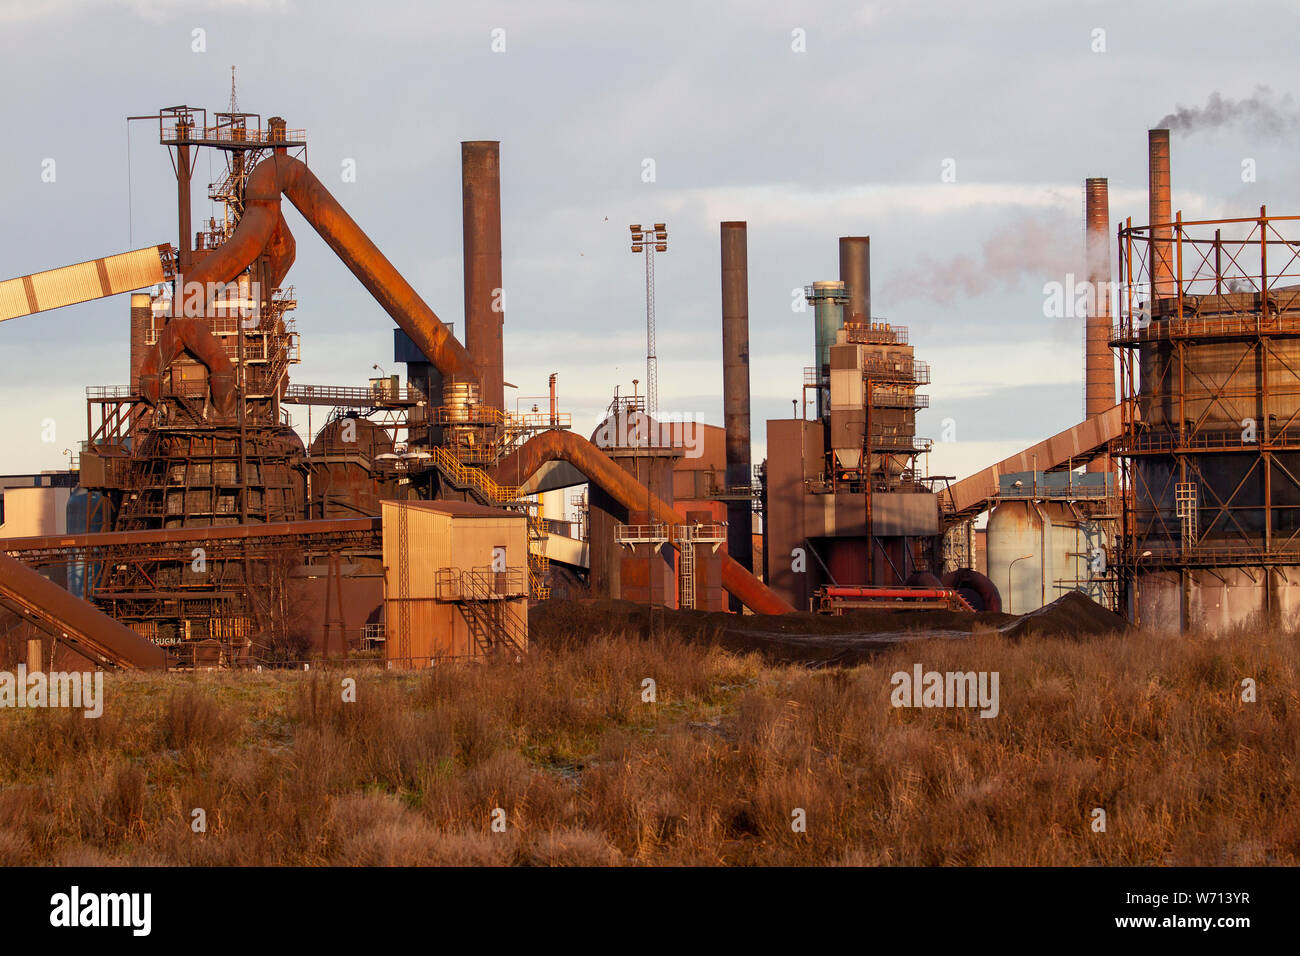 Pictures of a dirty steel plant with smoky chimneys Stock Photo